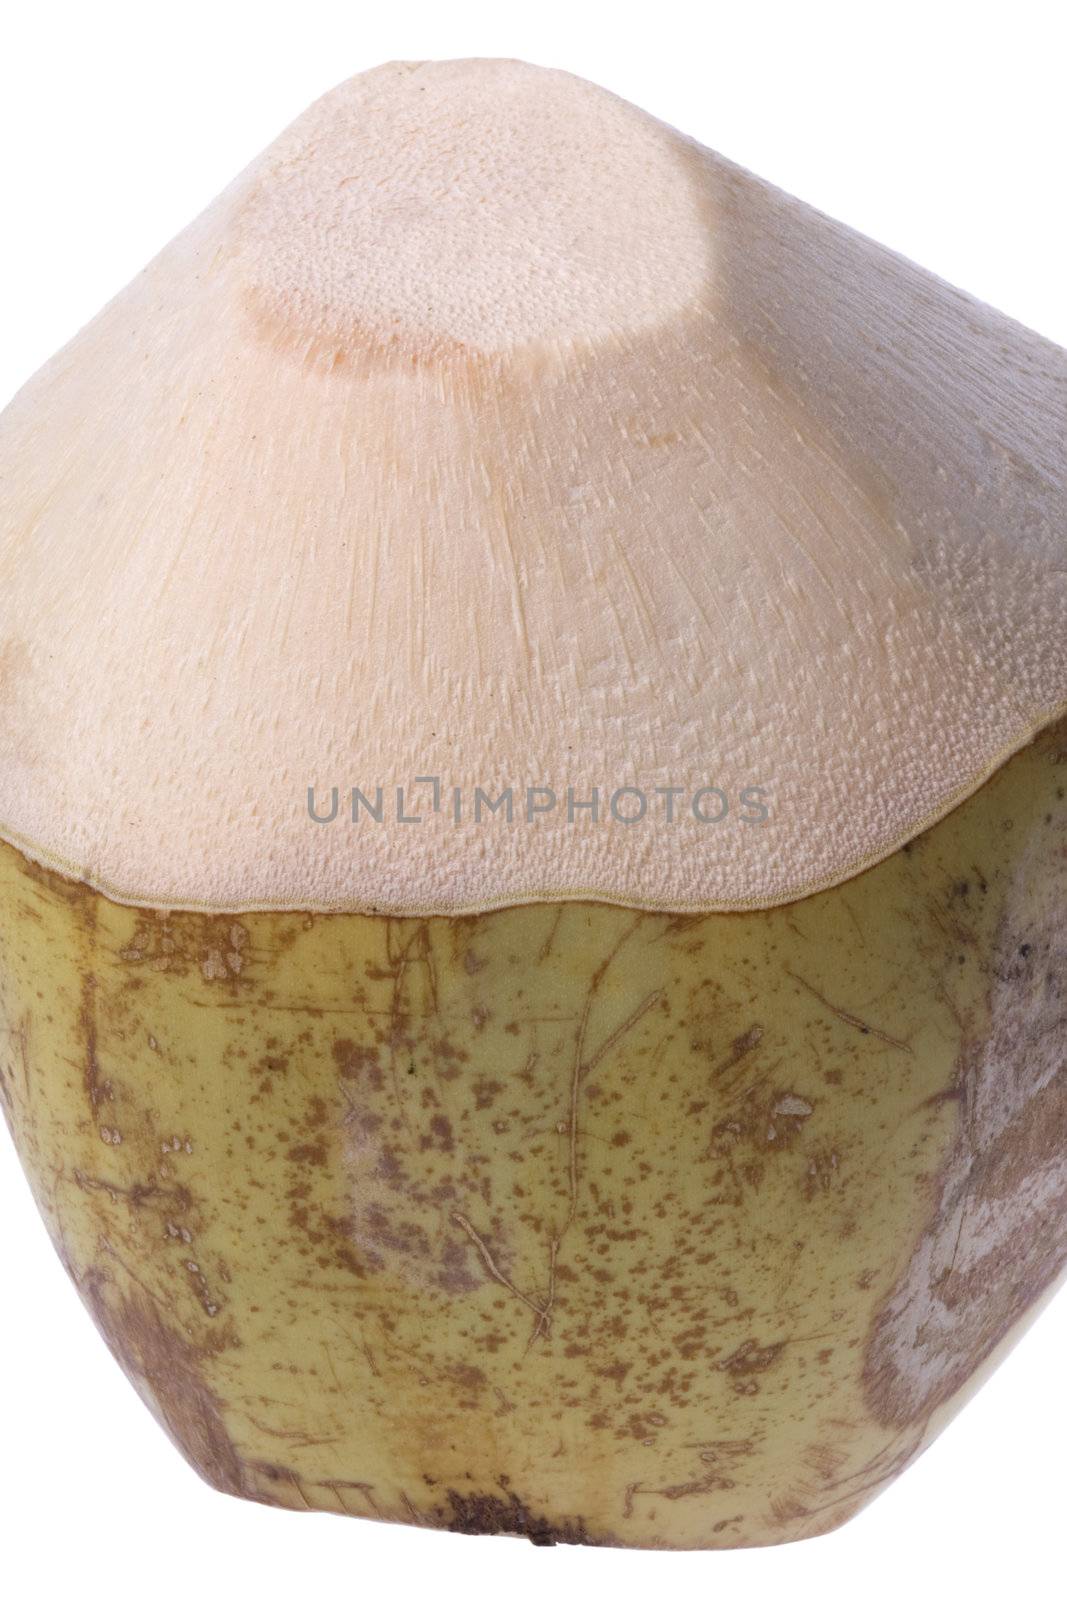 Isolated image of a fresh coconut.